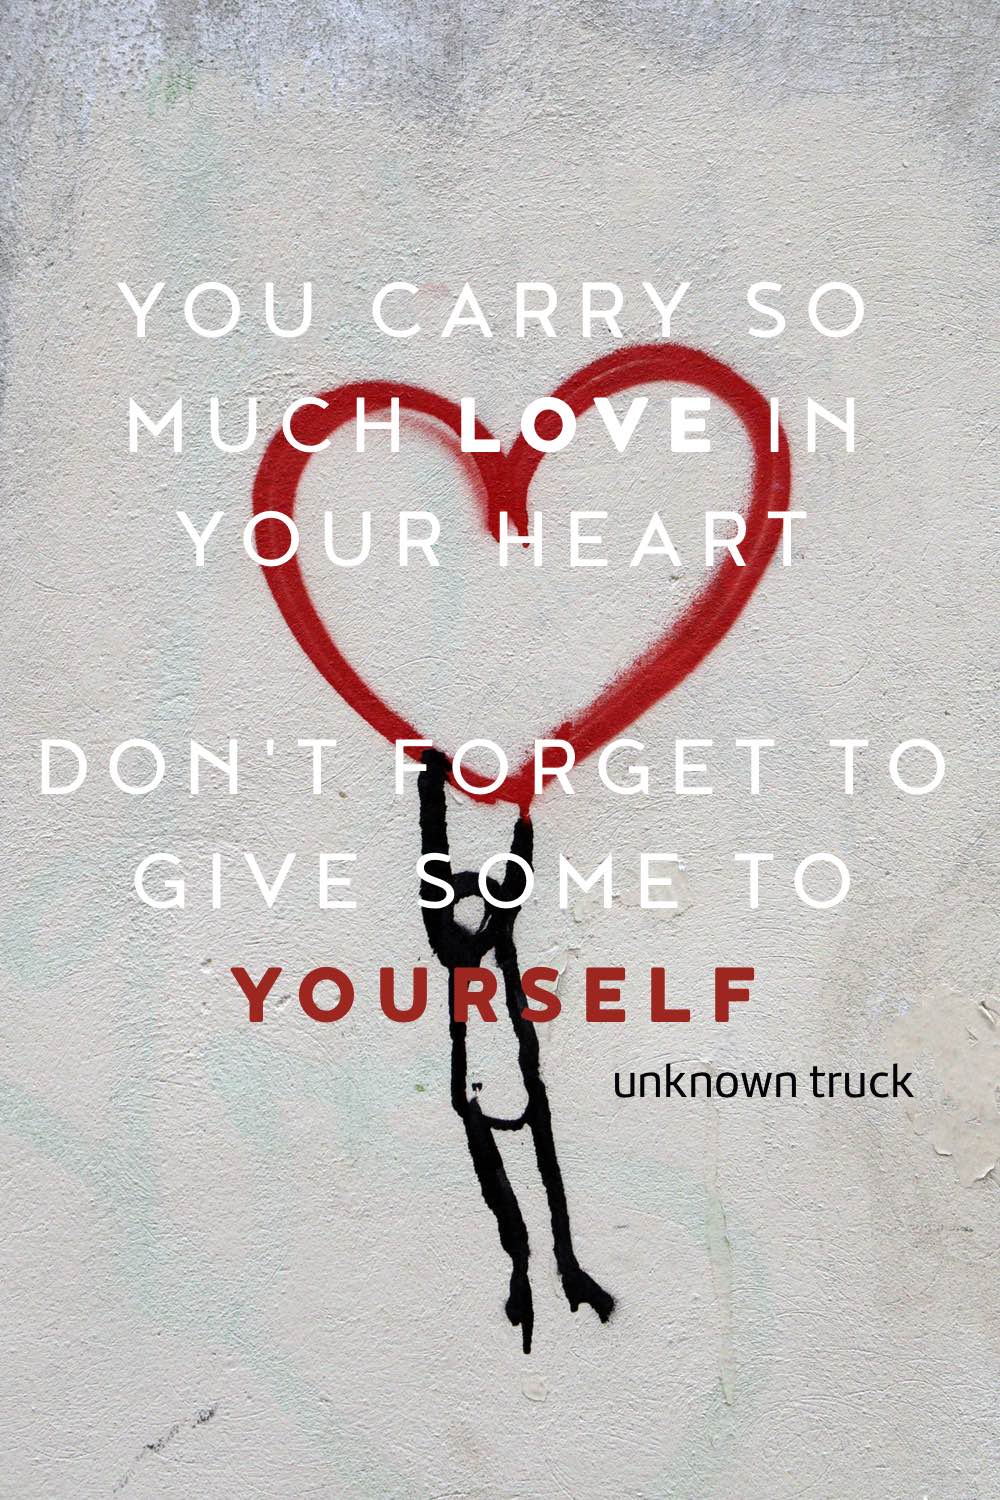 Mindful quote: YOU CARRY SO MUCH LOVE IN YOUR HEART
DON'T FORGET TO GIVE SOME TO YOURSELF - unknown truck